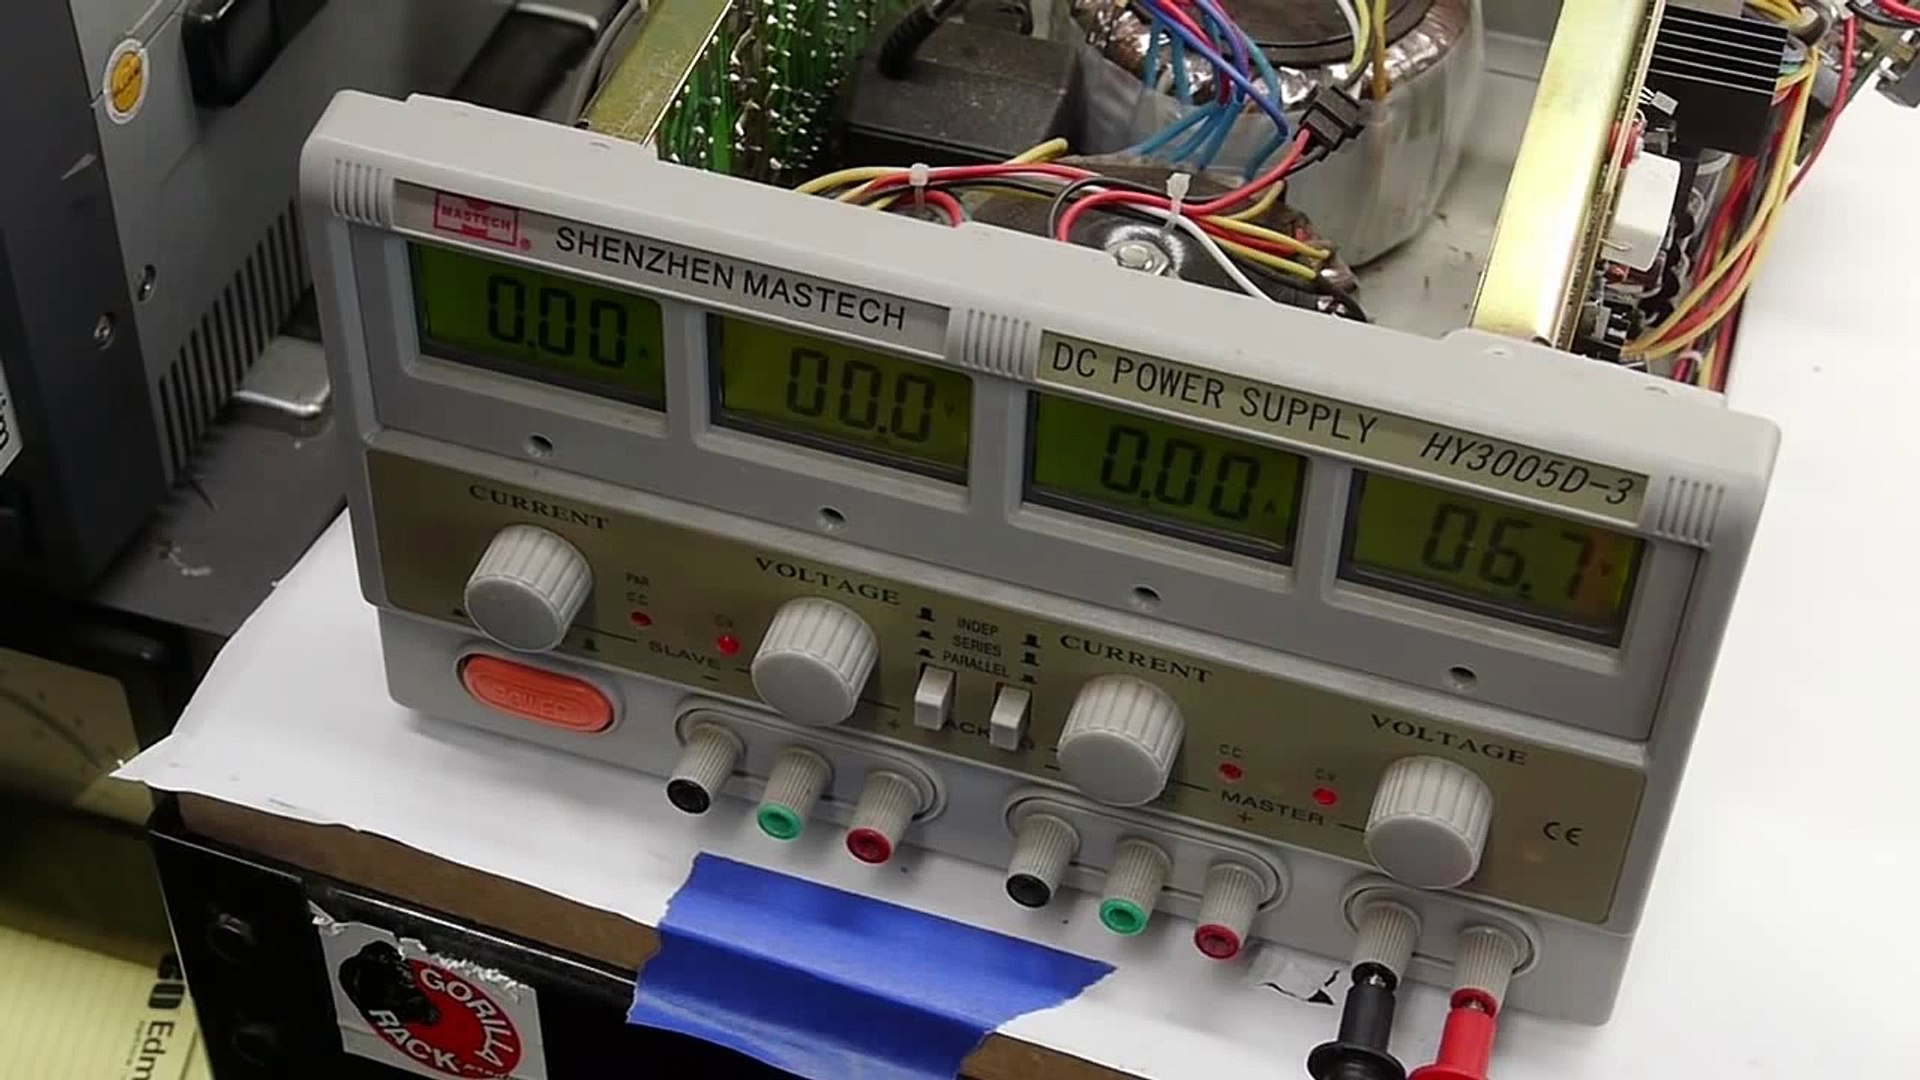 Repairing the 5V output from a Mastech HY3005D-3 (cheap import) power supply  - video Dailymotion